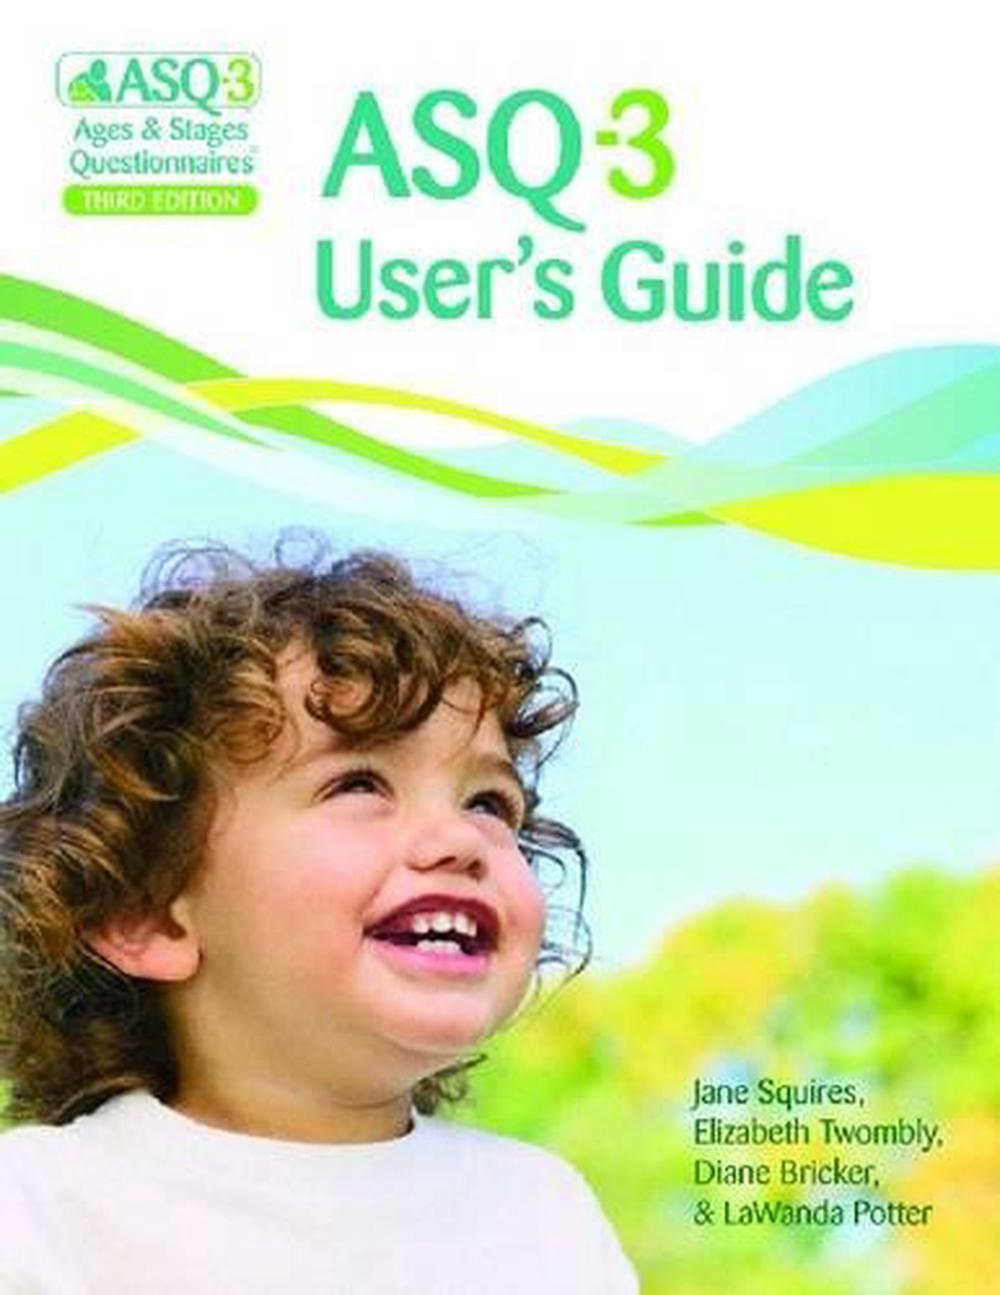 asq-3-user-s-guide-ages-stages-questionnaires-by-jane-squires